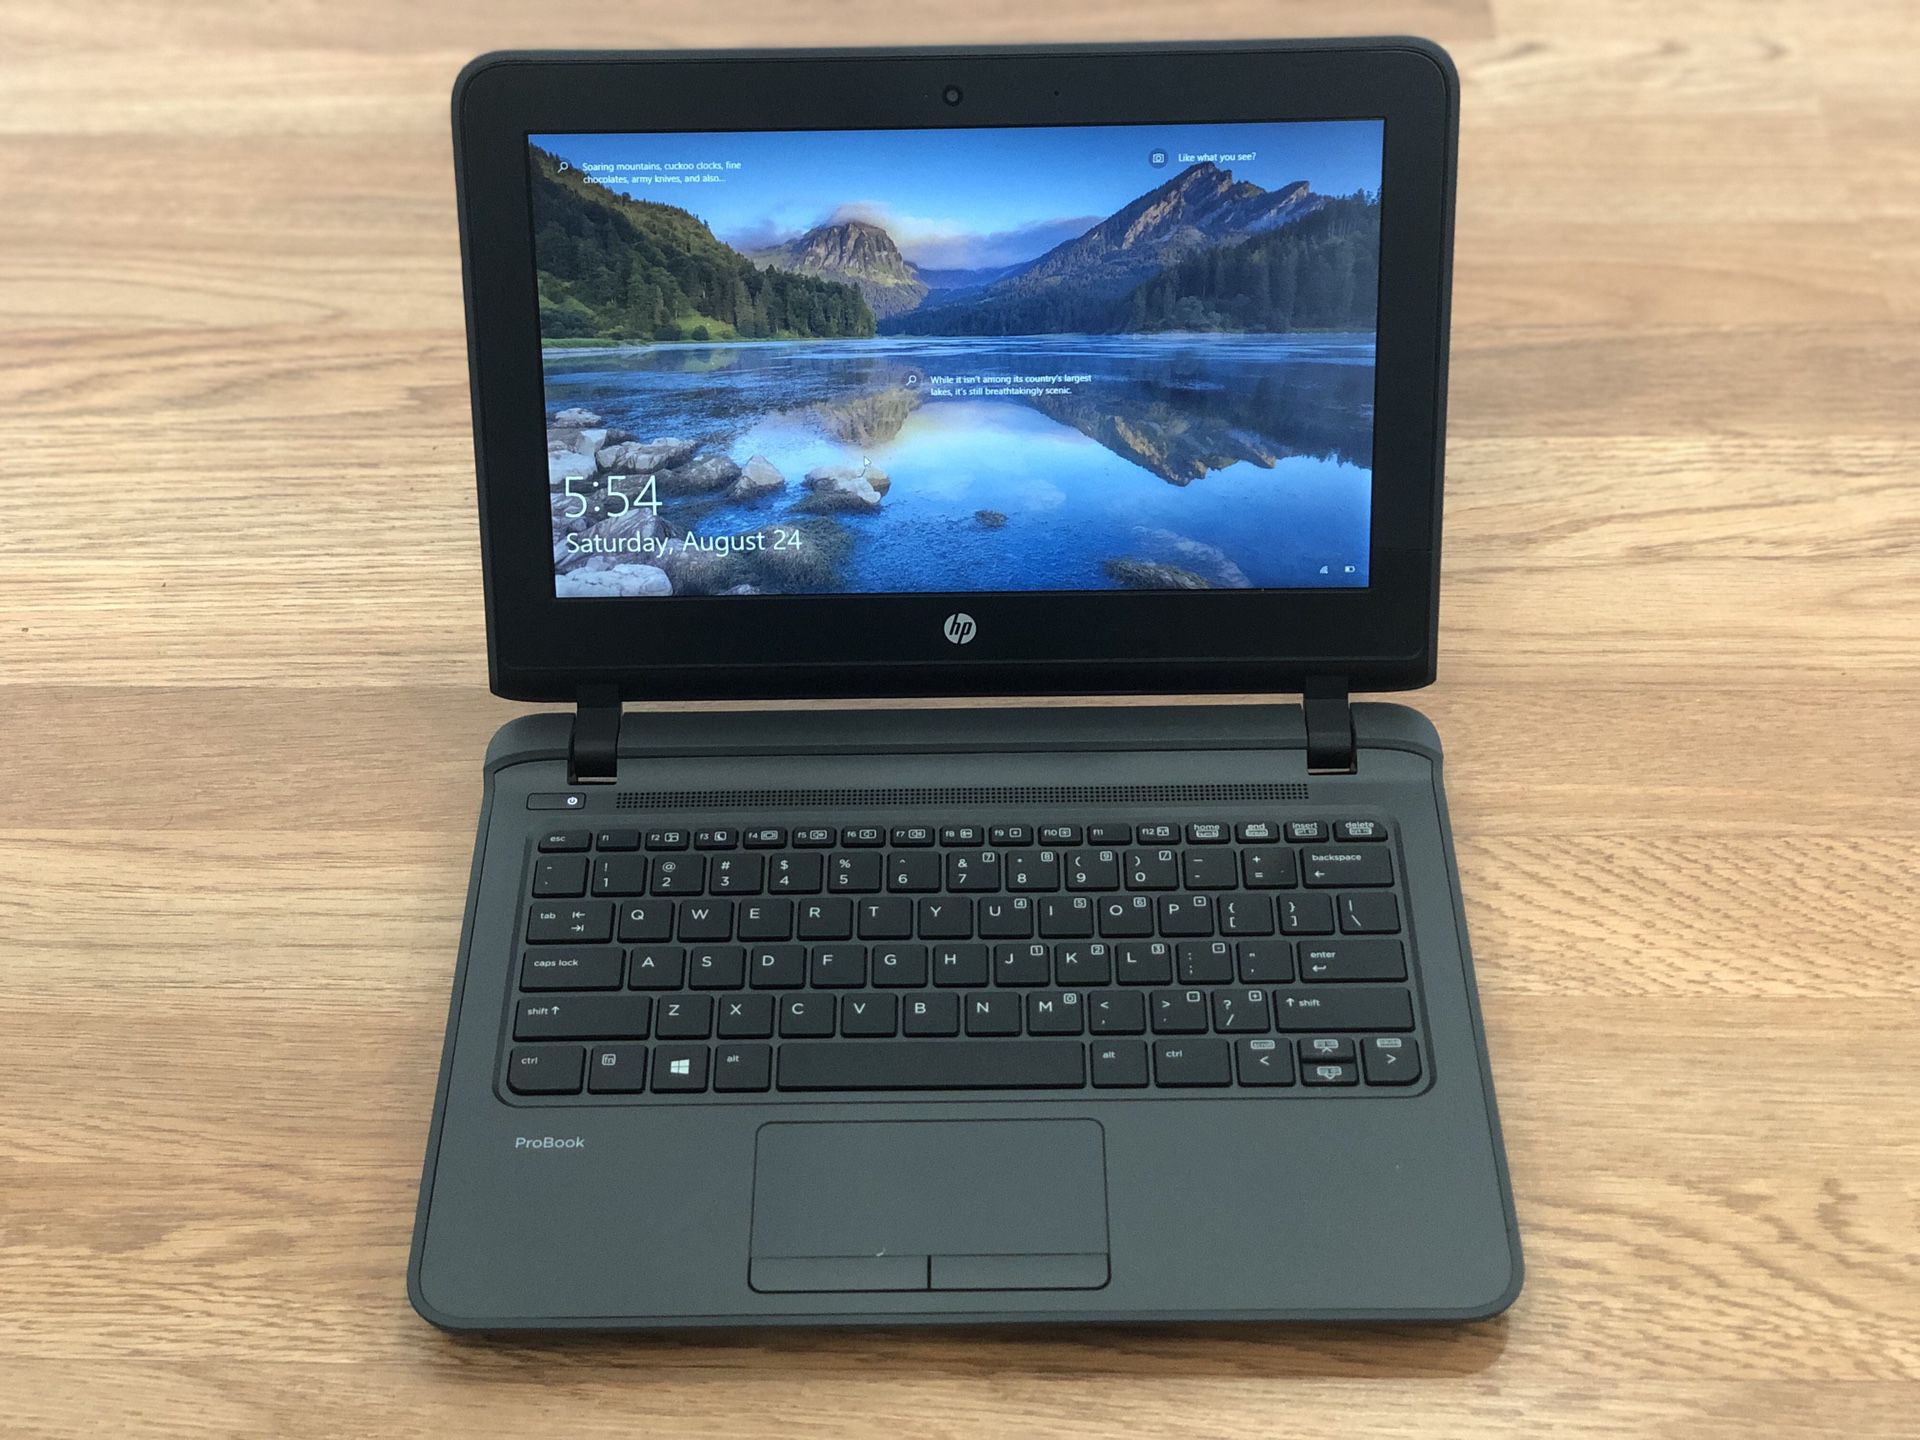 HP ProBook 11 G2 8GB/120SSD - -Excellent Condition Fully Functional -LOW PRICE @ TechStreet!!!!!!!